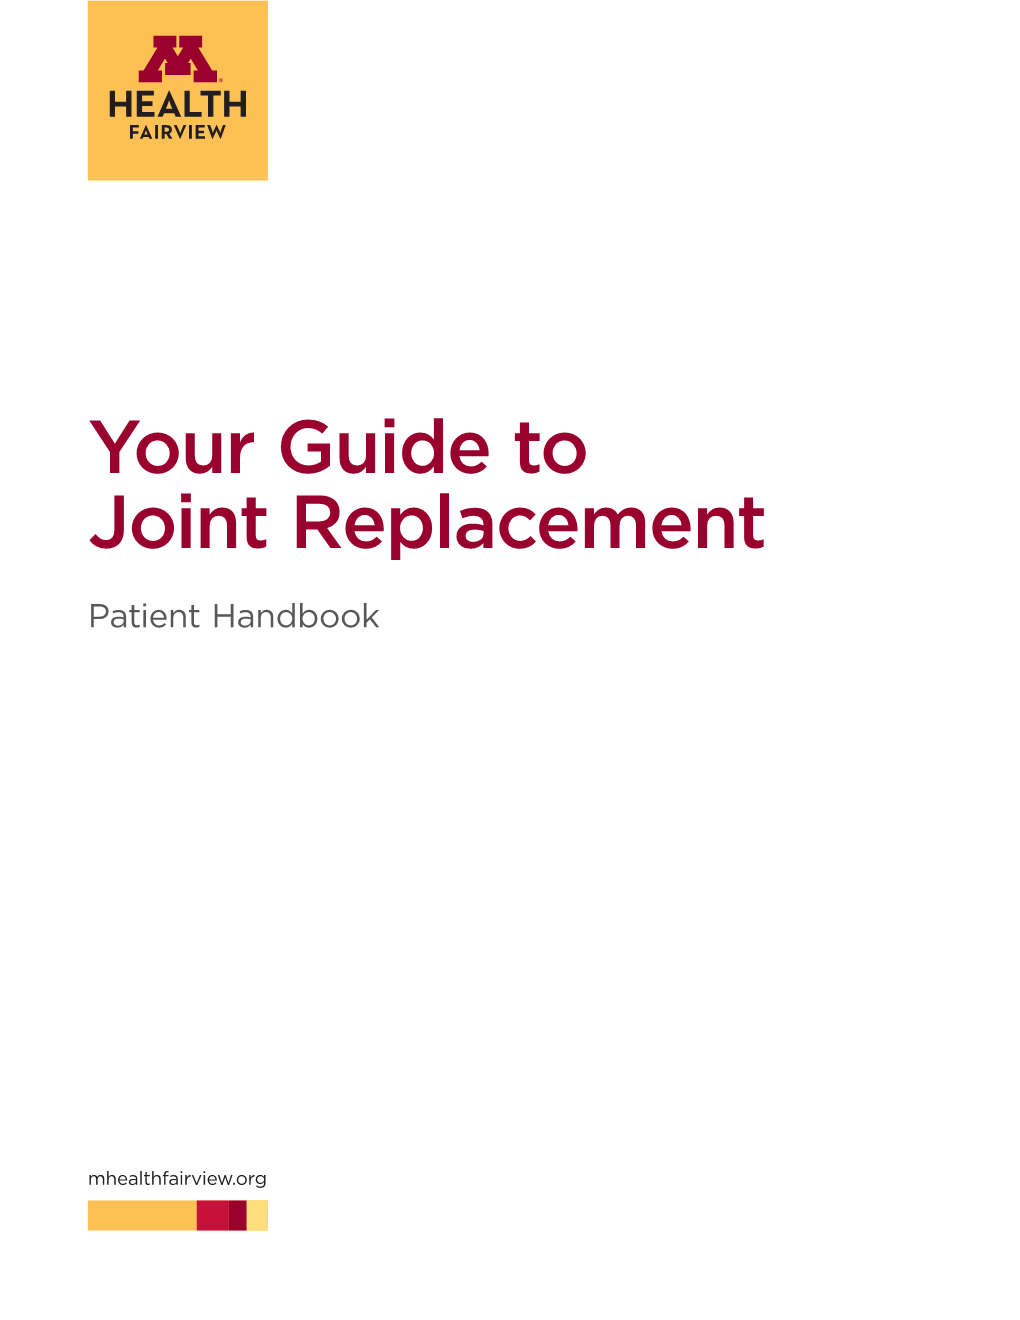 Your Guide to Joint Replacement: Patient Handbook